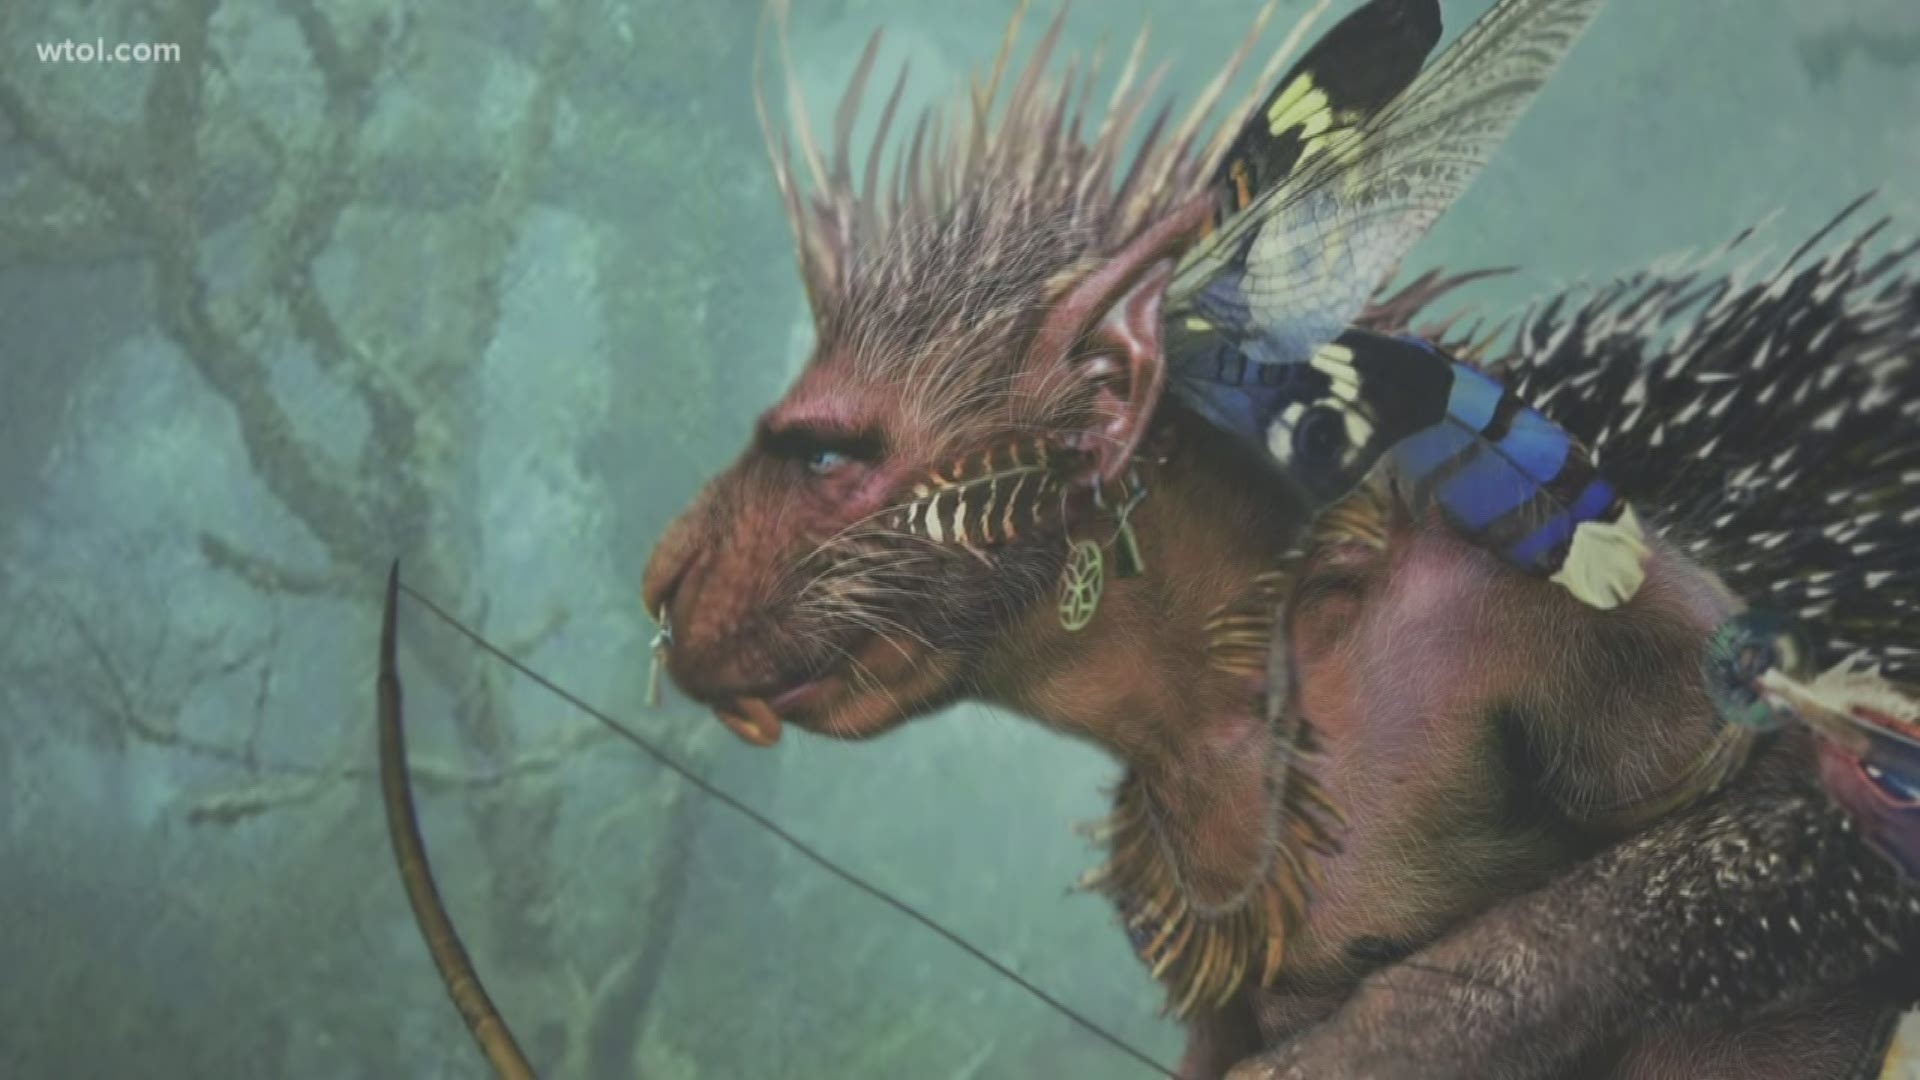 Ohio: An Unnatural History showcases the stories of multiple mythical monsters